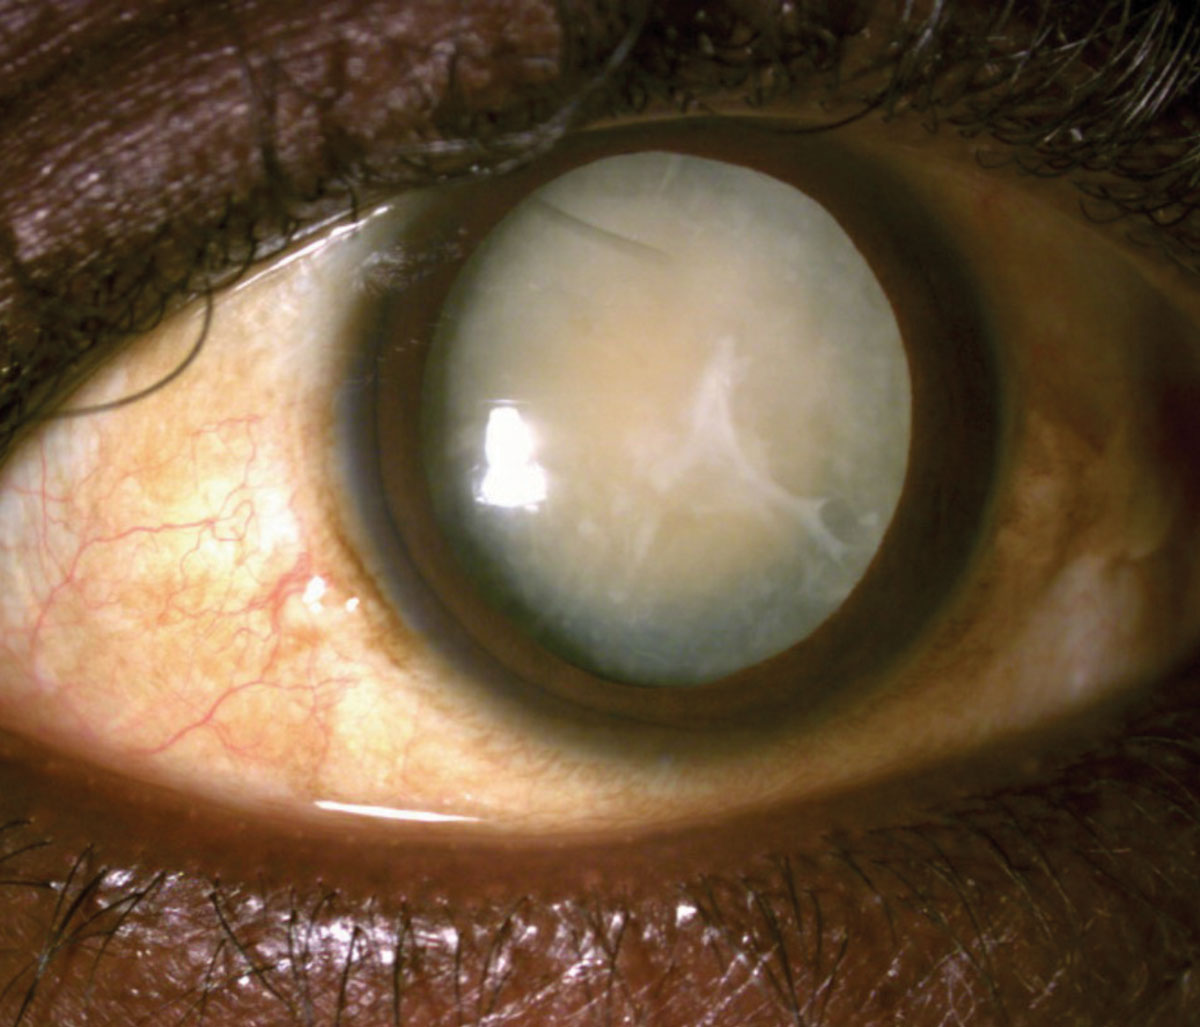 Watching videos about their options helped cataract surgery patients feel more confident and informed throughout the decision process, this study suggests. Photo: Joseph Sowka, OD